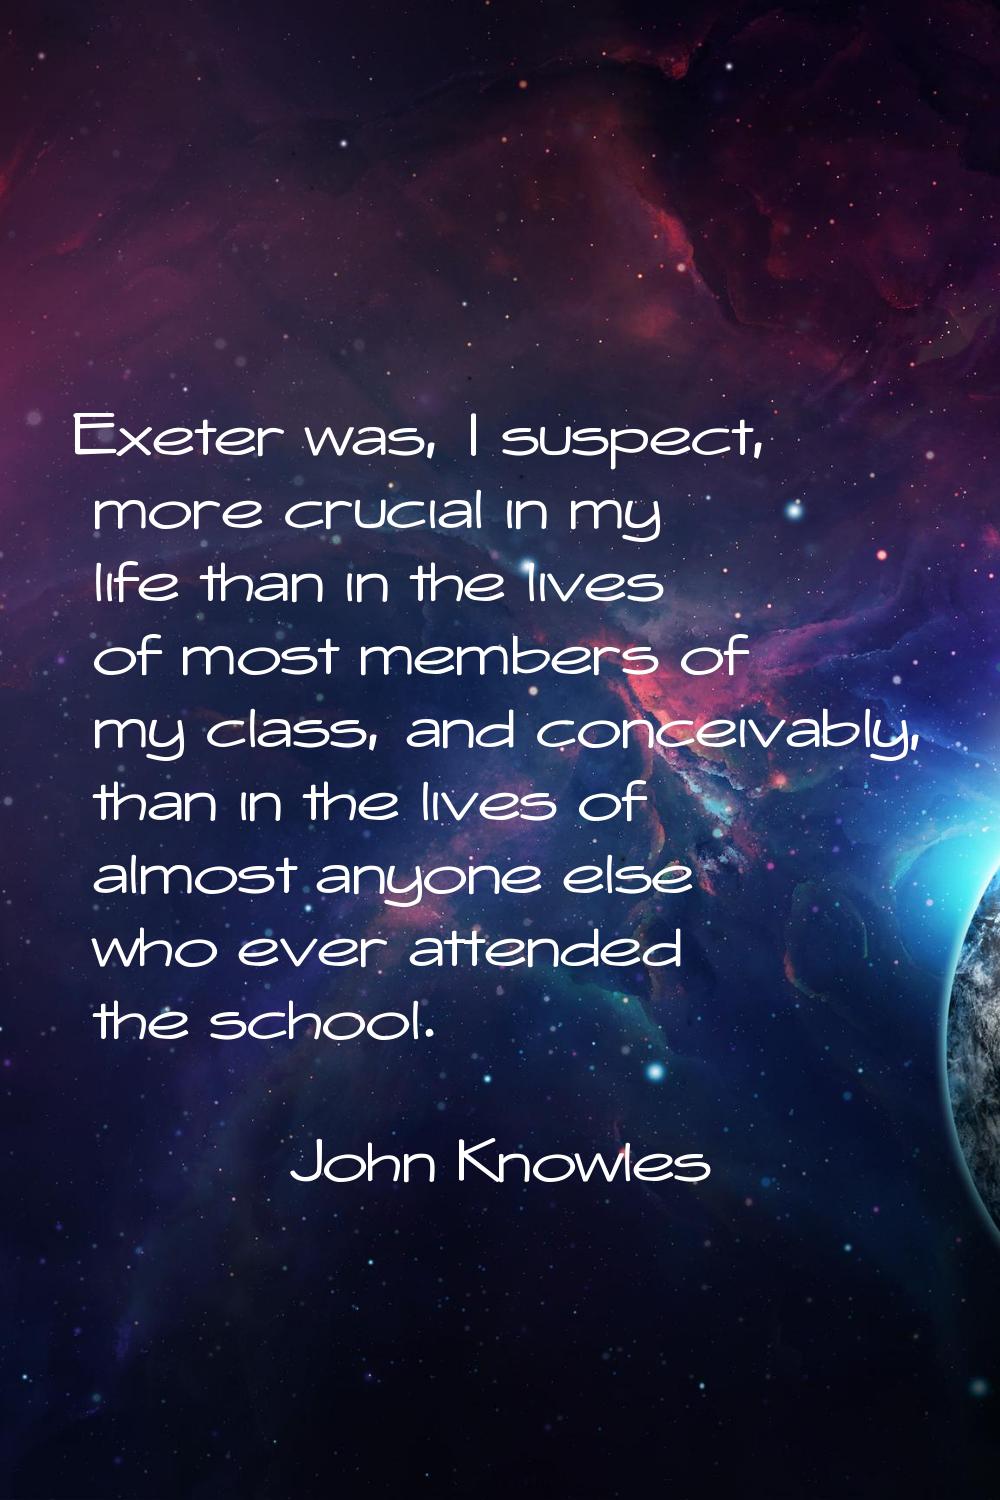 Exeter was, I suspect, more crucial in my life than in the lives of most members of my class, and c